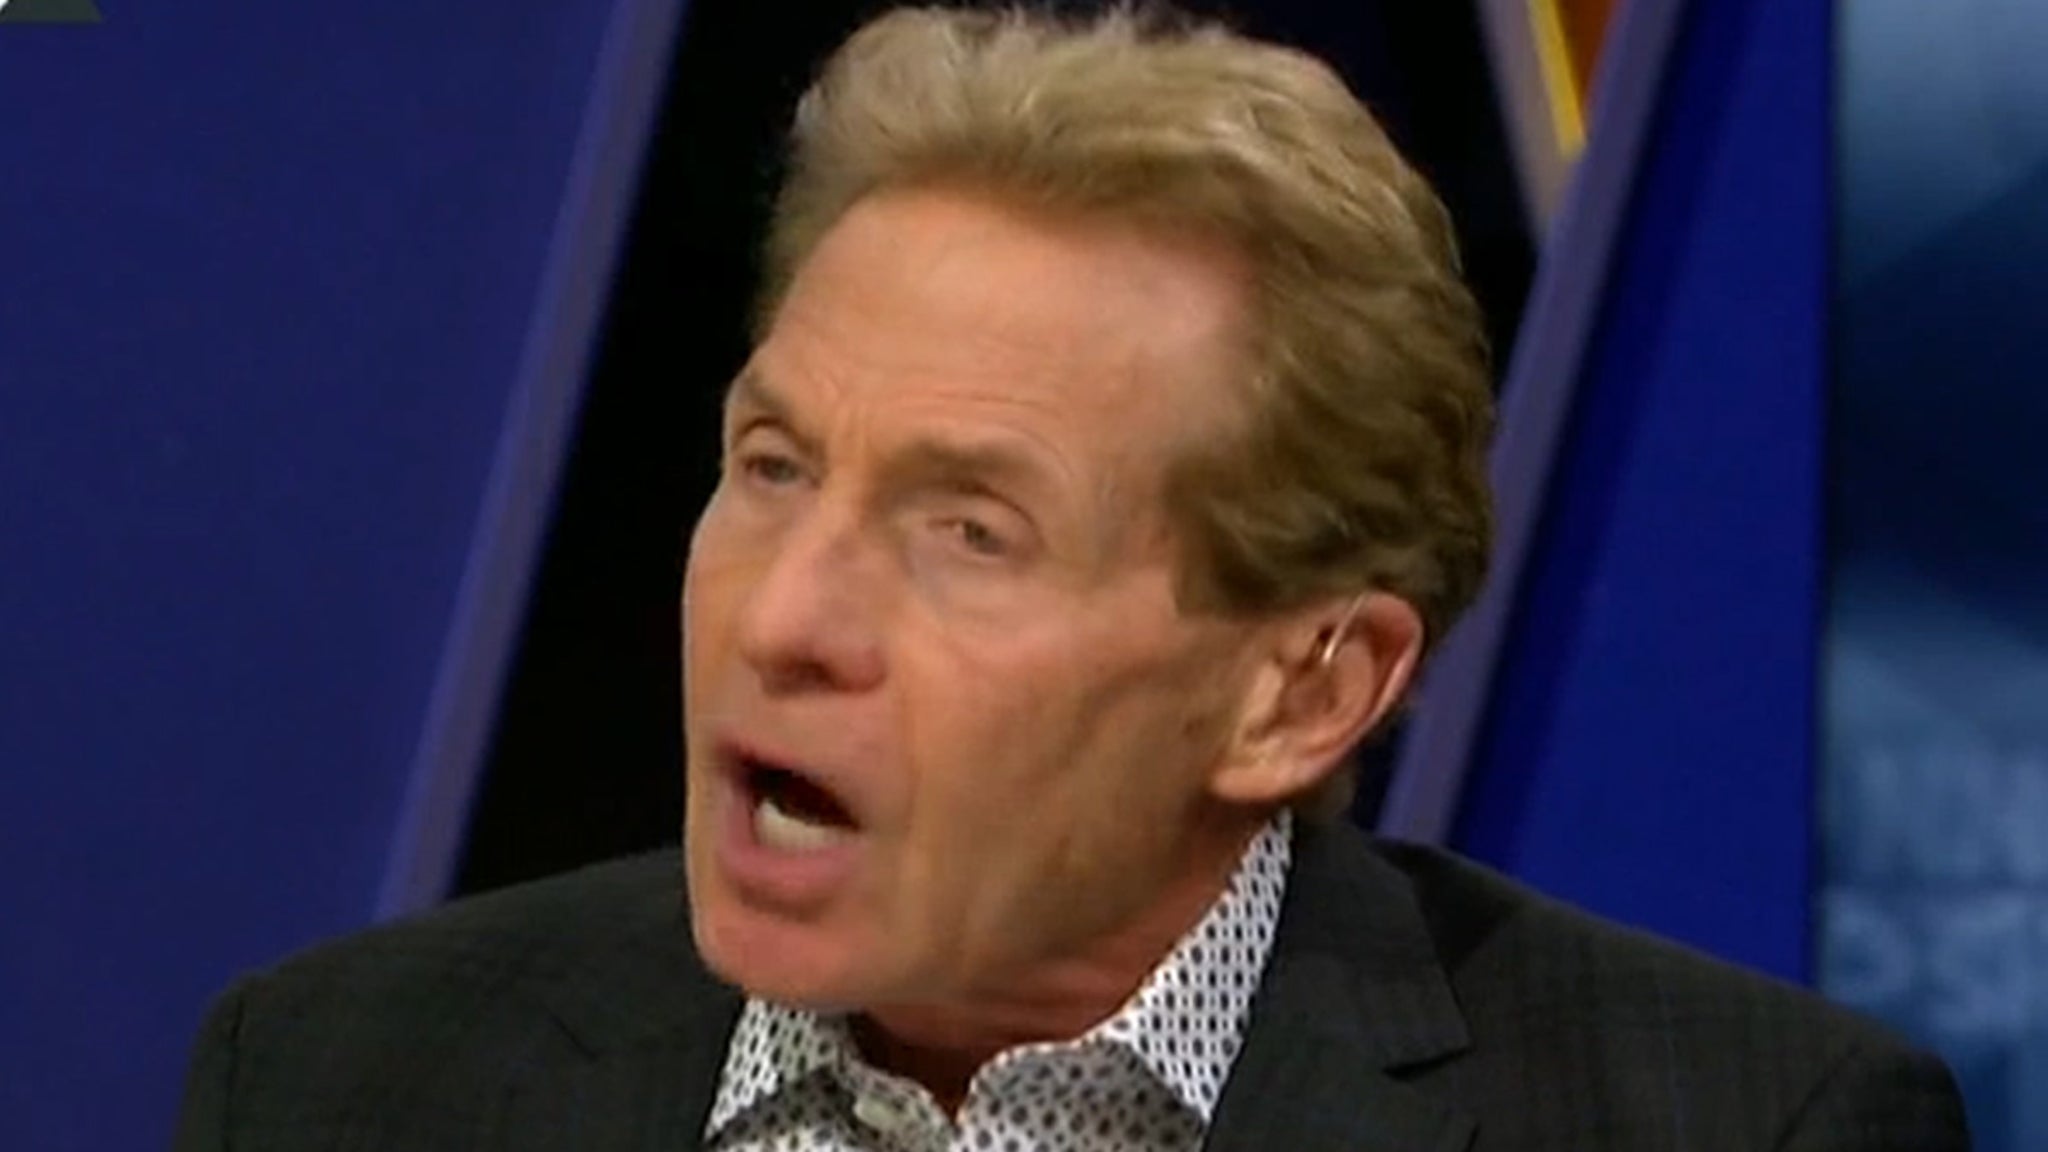 Skip Bayless Says White Owners Uncomfortable Socializing W/ Black Coaches, So They Don’t Hire Them